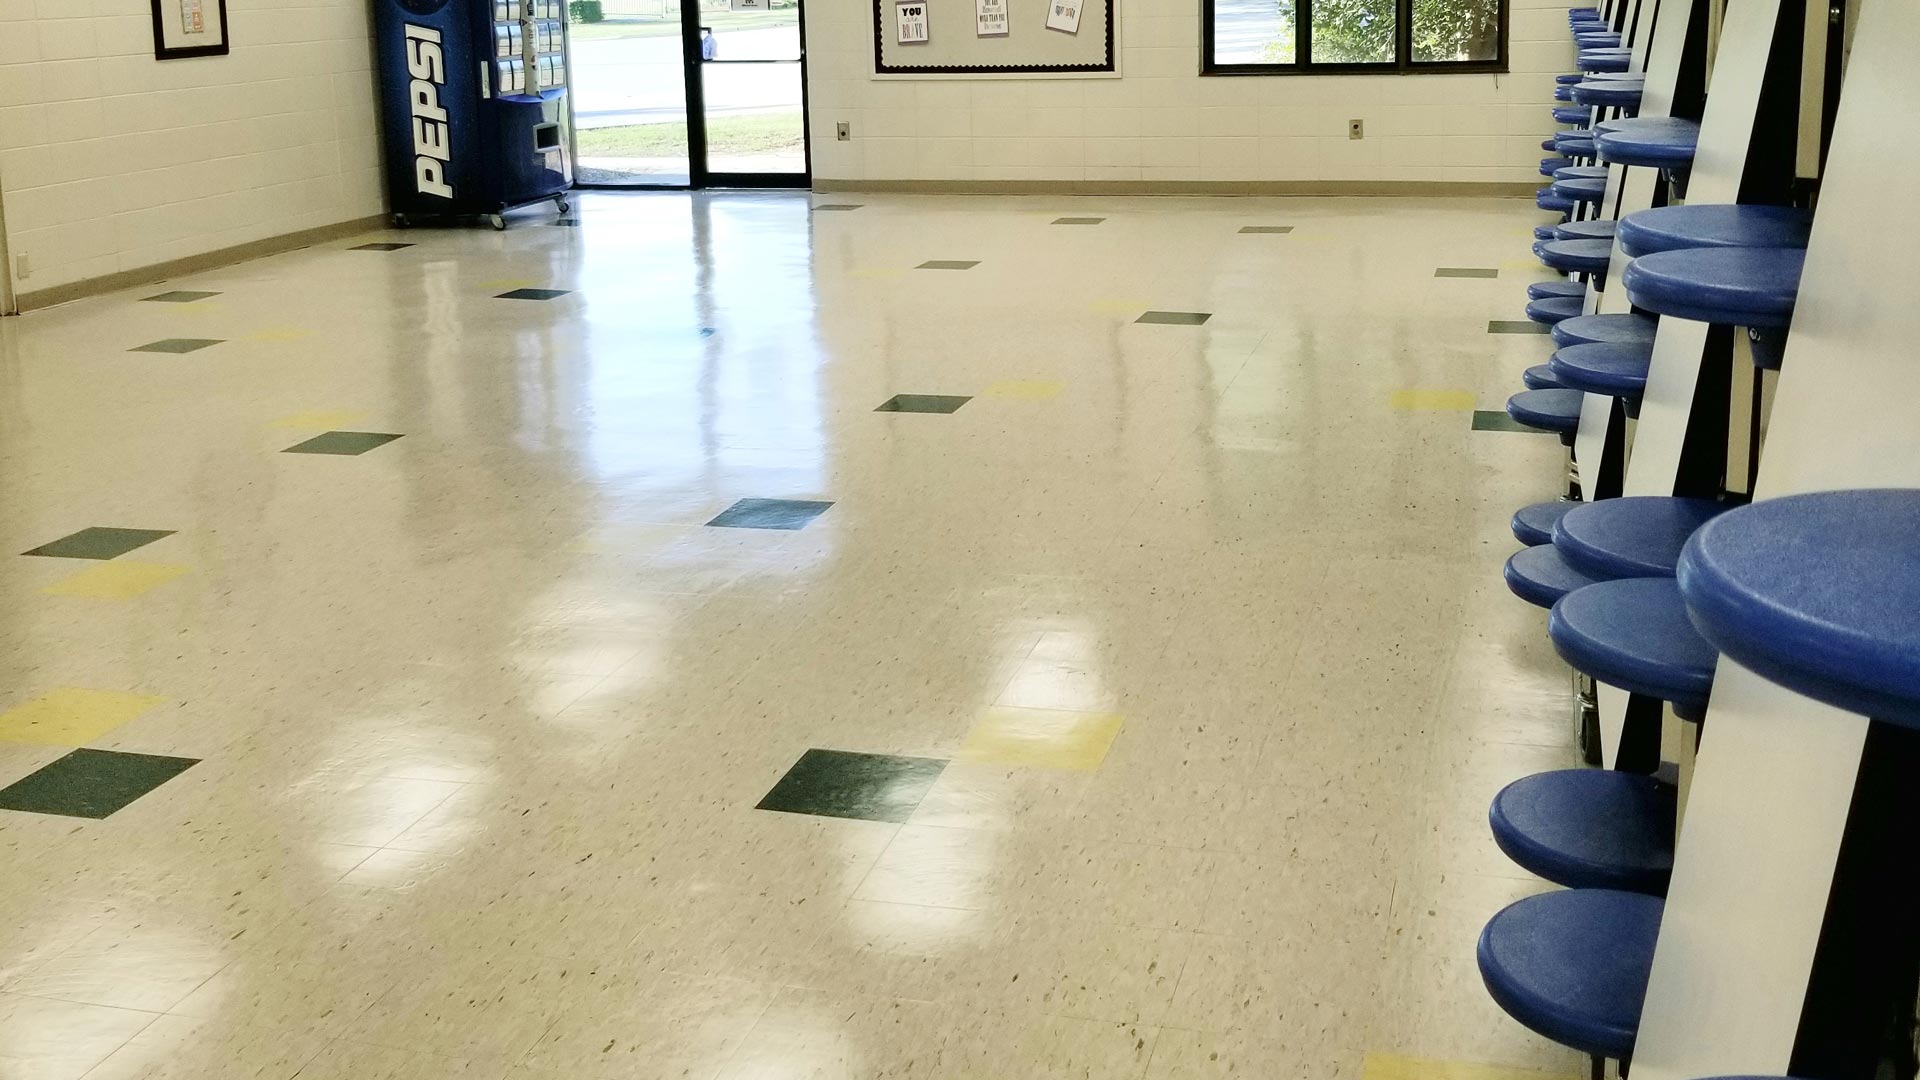 Floor Stripping, Waxing, and Buffing are Important - Upstate Janitorial